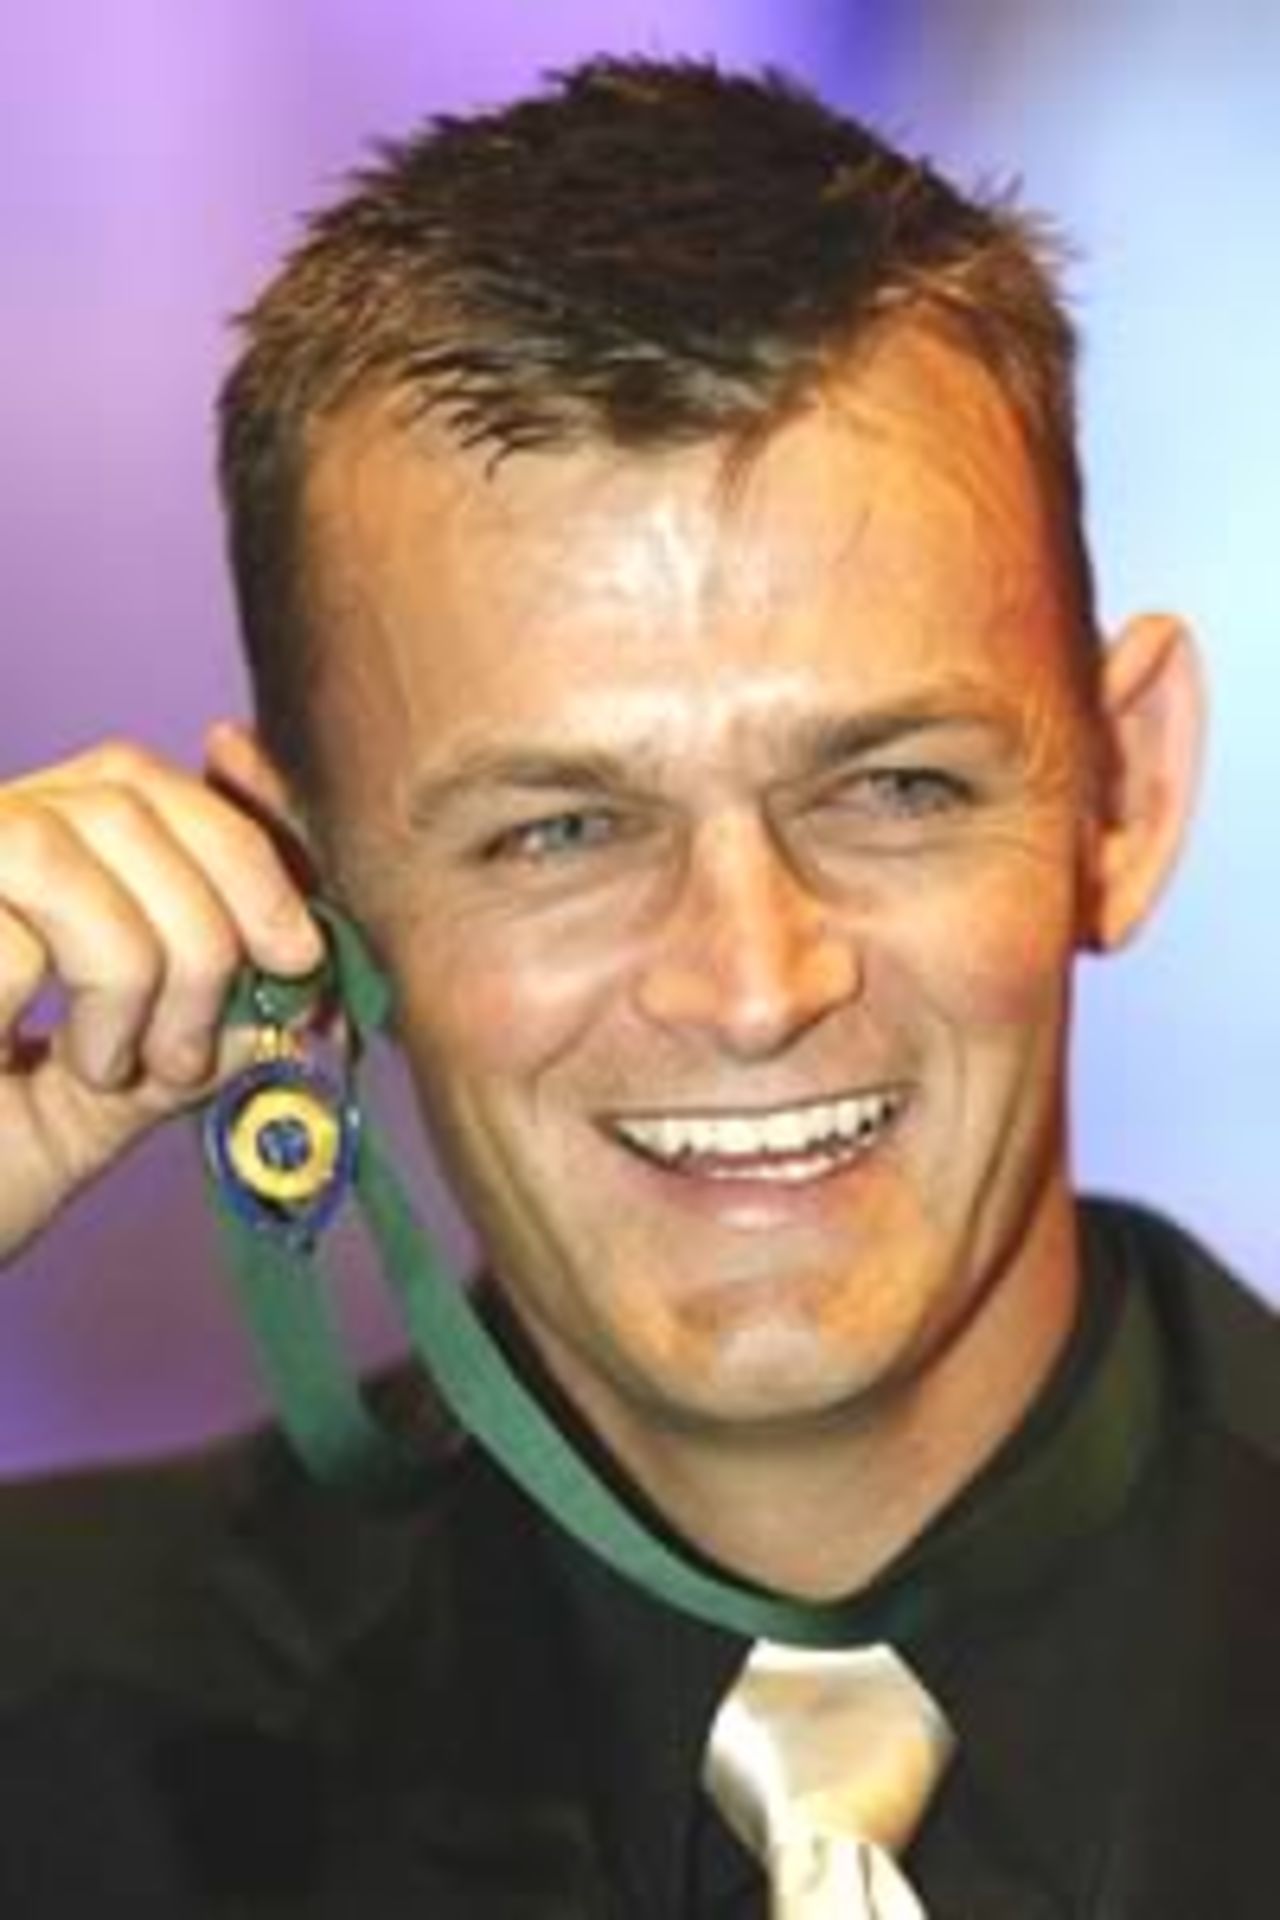 MELBOURNE - JANUARY 28: Adam Gilchrist from Australia is awarded the Allan Border Medal during the presentation of the Allan Border Medal at the Crown Palladium Ballroom in Melbourne, Australia on January 28, 2003. The Allan Border Medal is awarded to Australia's best cricketer over the last 12 months in Tests and One-Day Internationals.